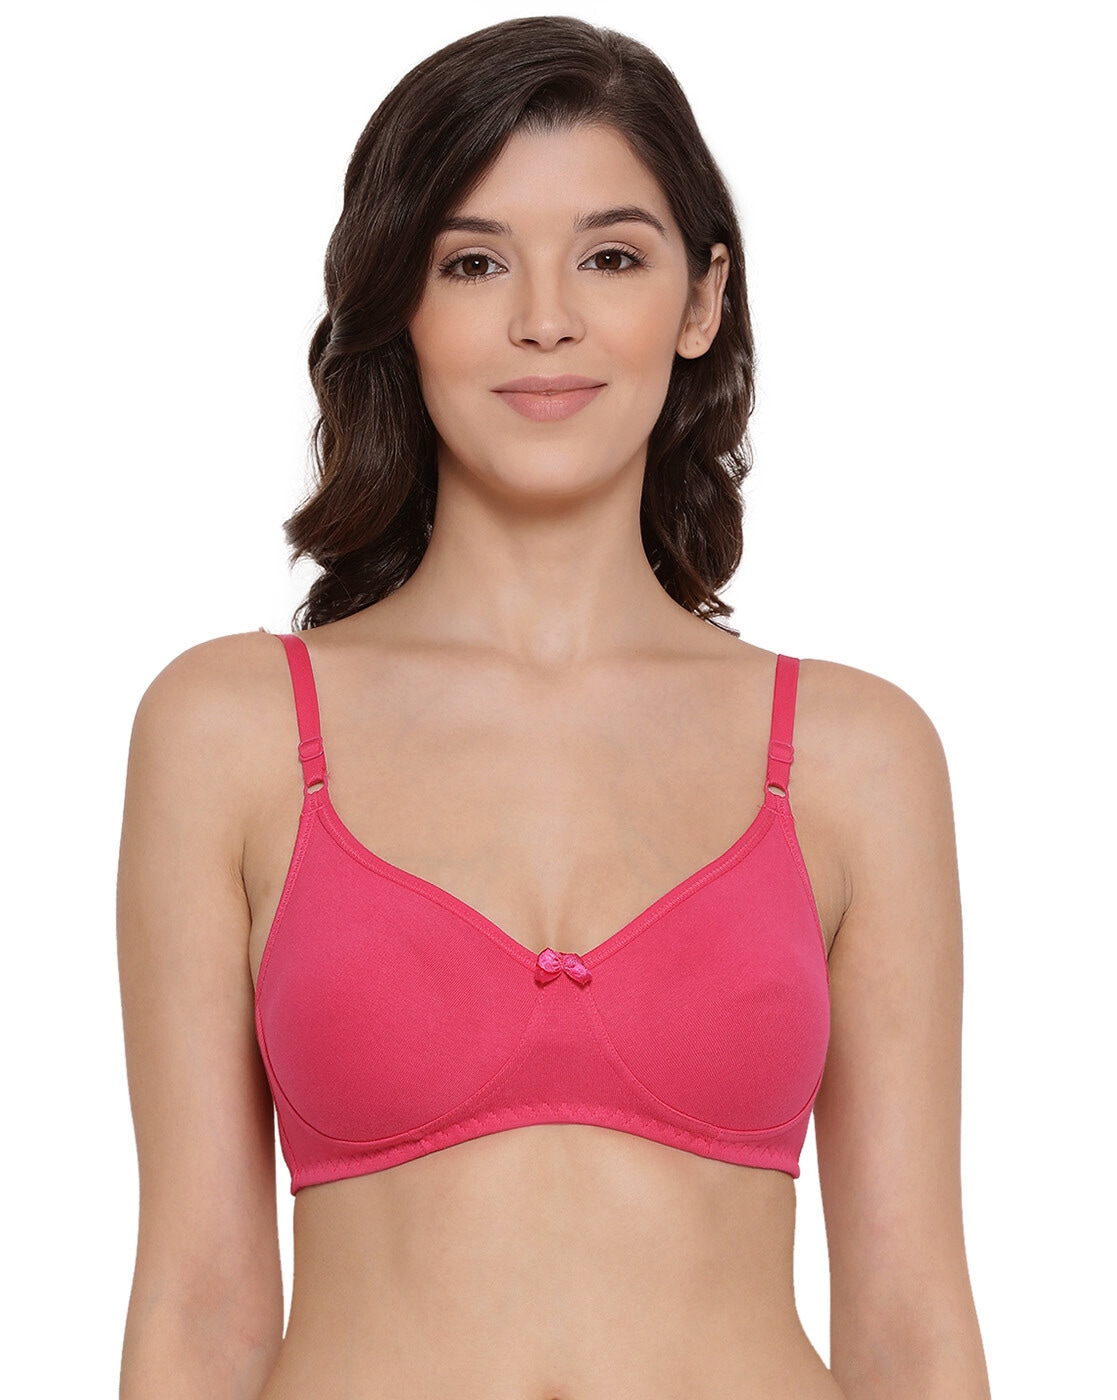 Pack of 2 Cotton Seamless Moulded T-Shirt Bra with Adjustable Strap